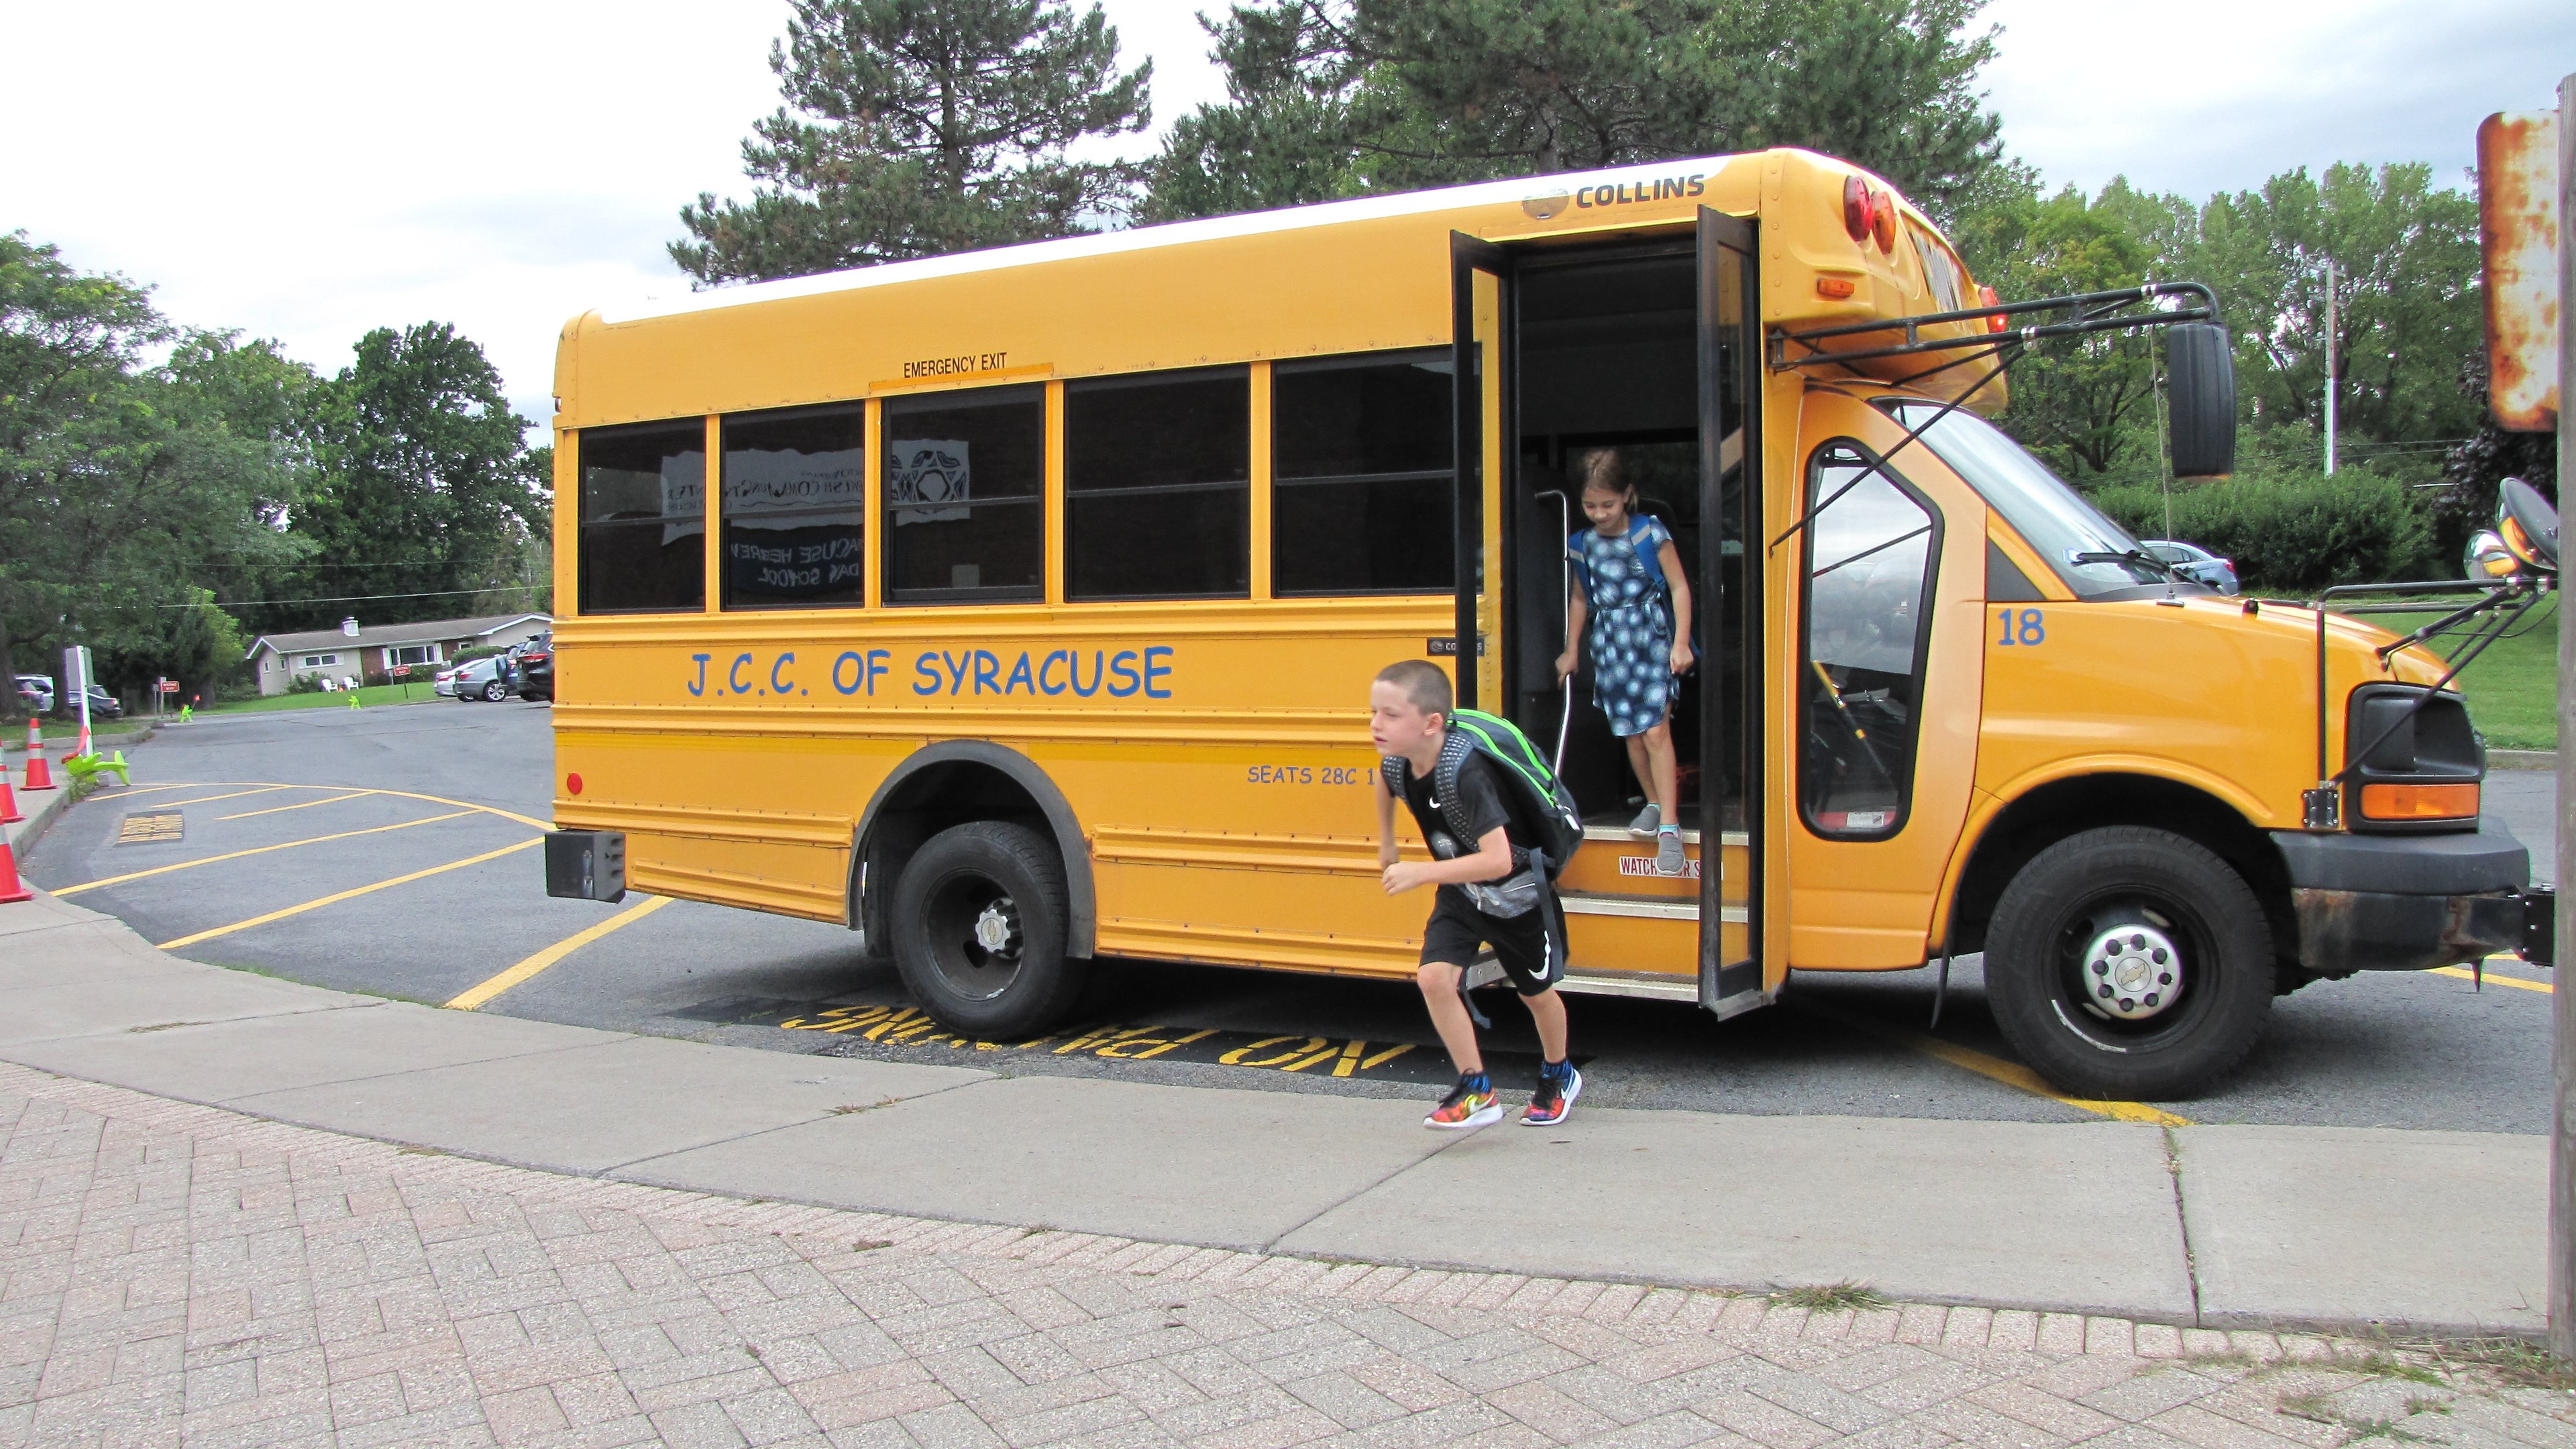 Kids run off a bus to the JCC